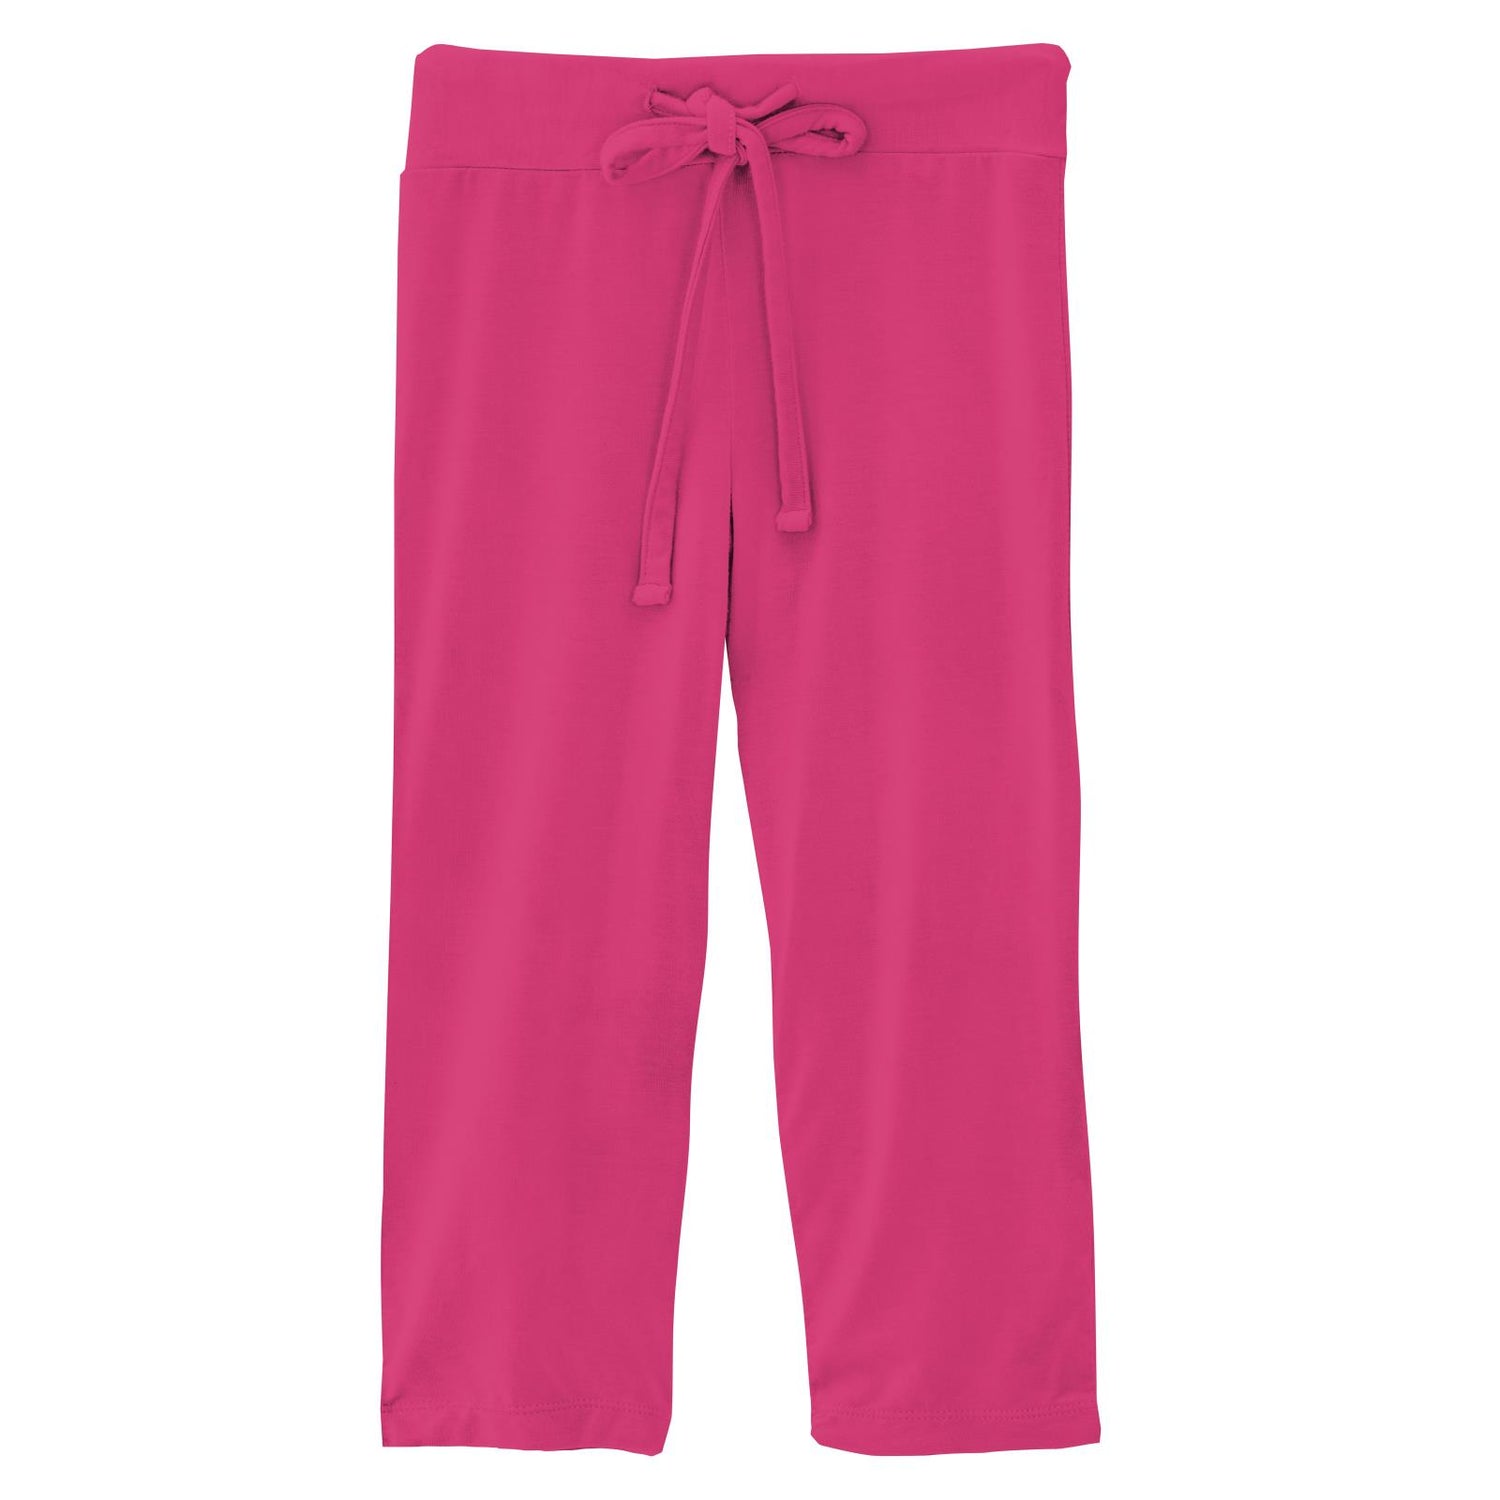 Relaxed Pants in Calypso